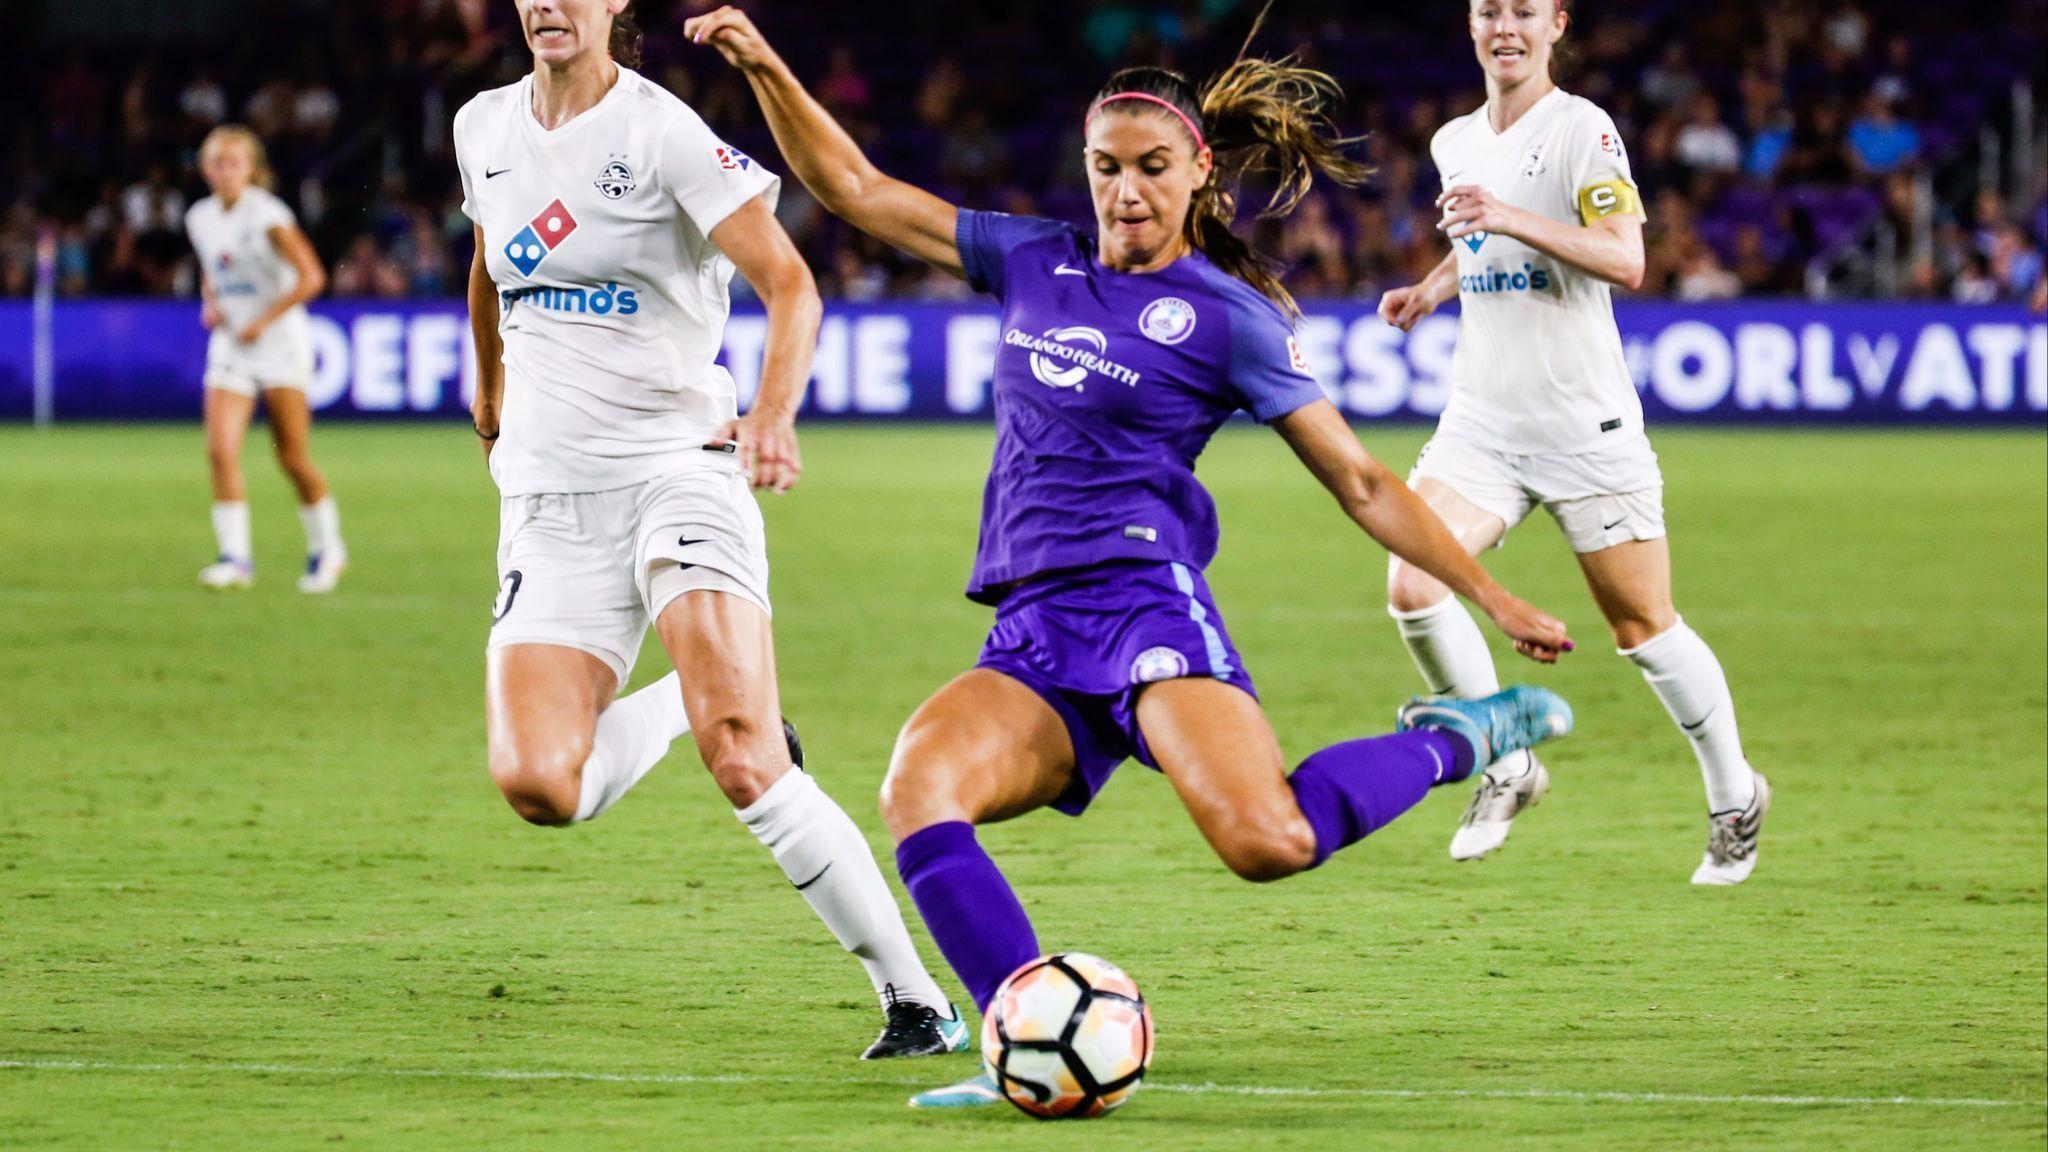 Alex Morgan to stay with Orlando Pride, skip return to French side